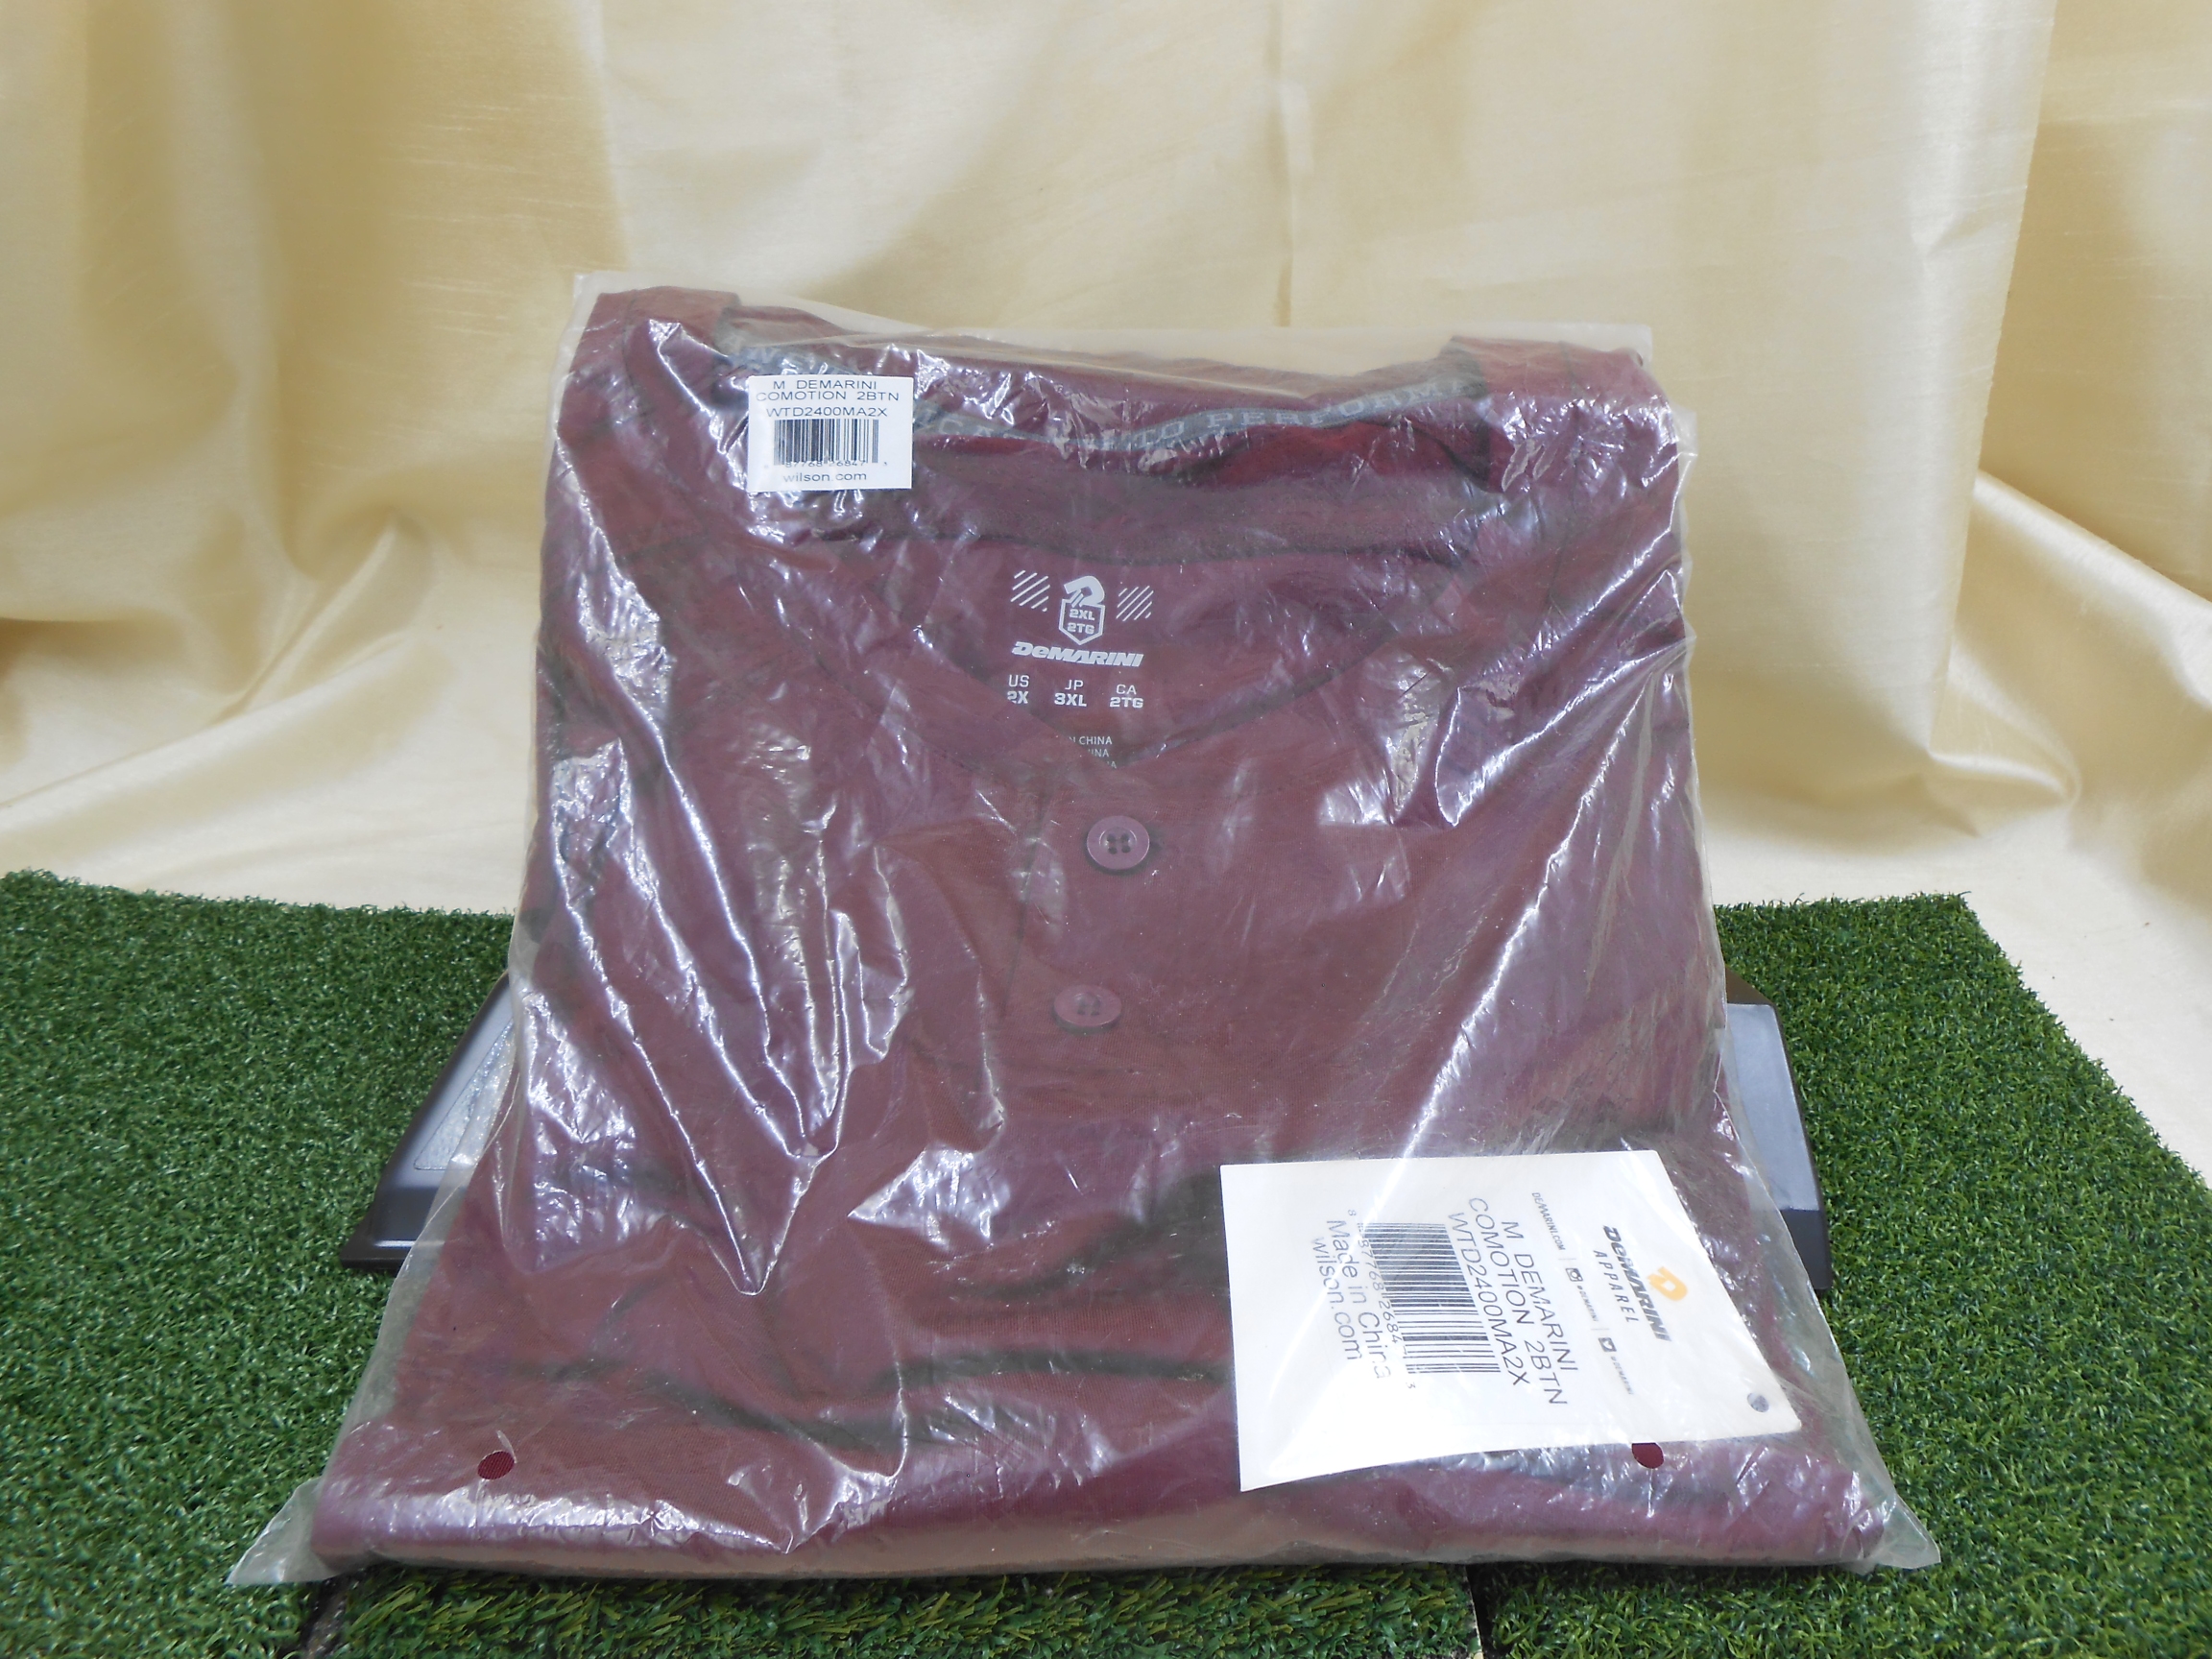 New DeMarini Batting Cage and Warm Up Pullovers All Size XXL in Maroon and Navy Blue